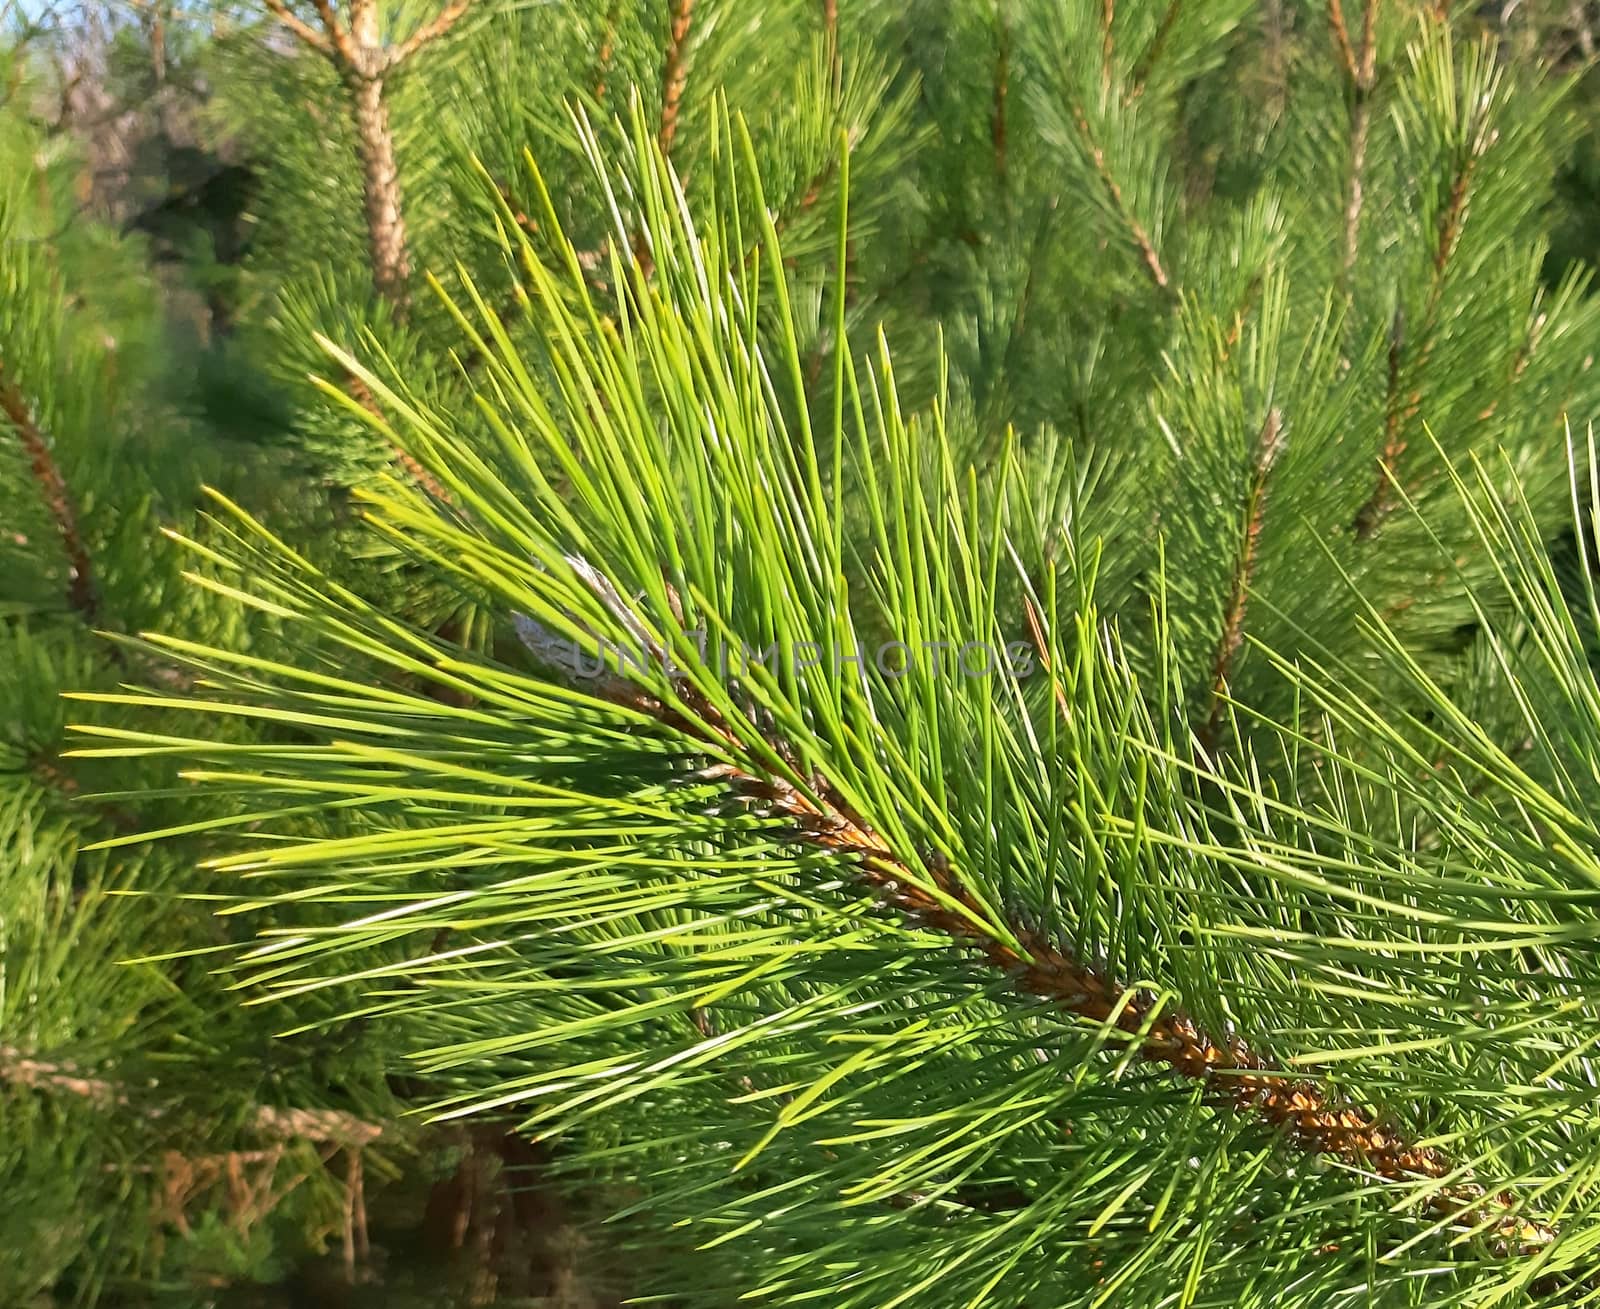 A young and green pine tree close up.